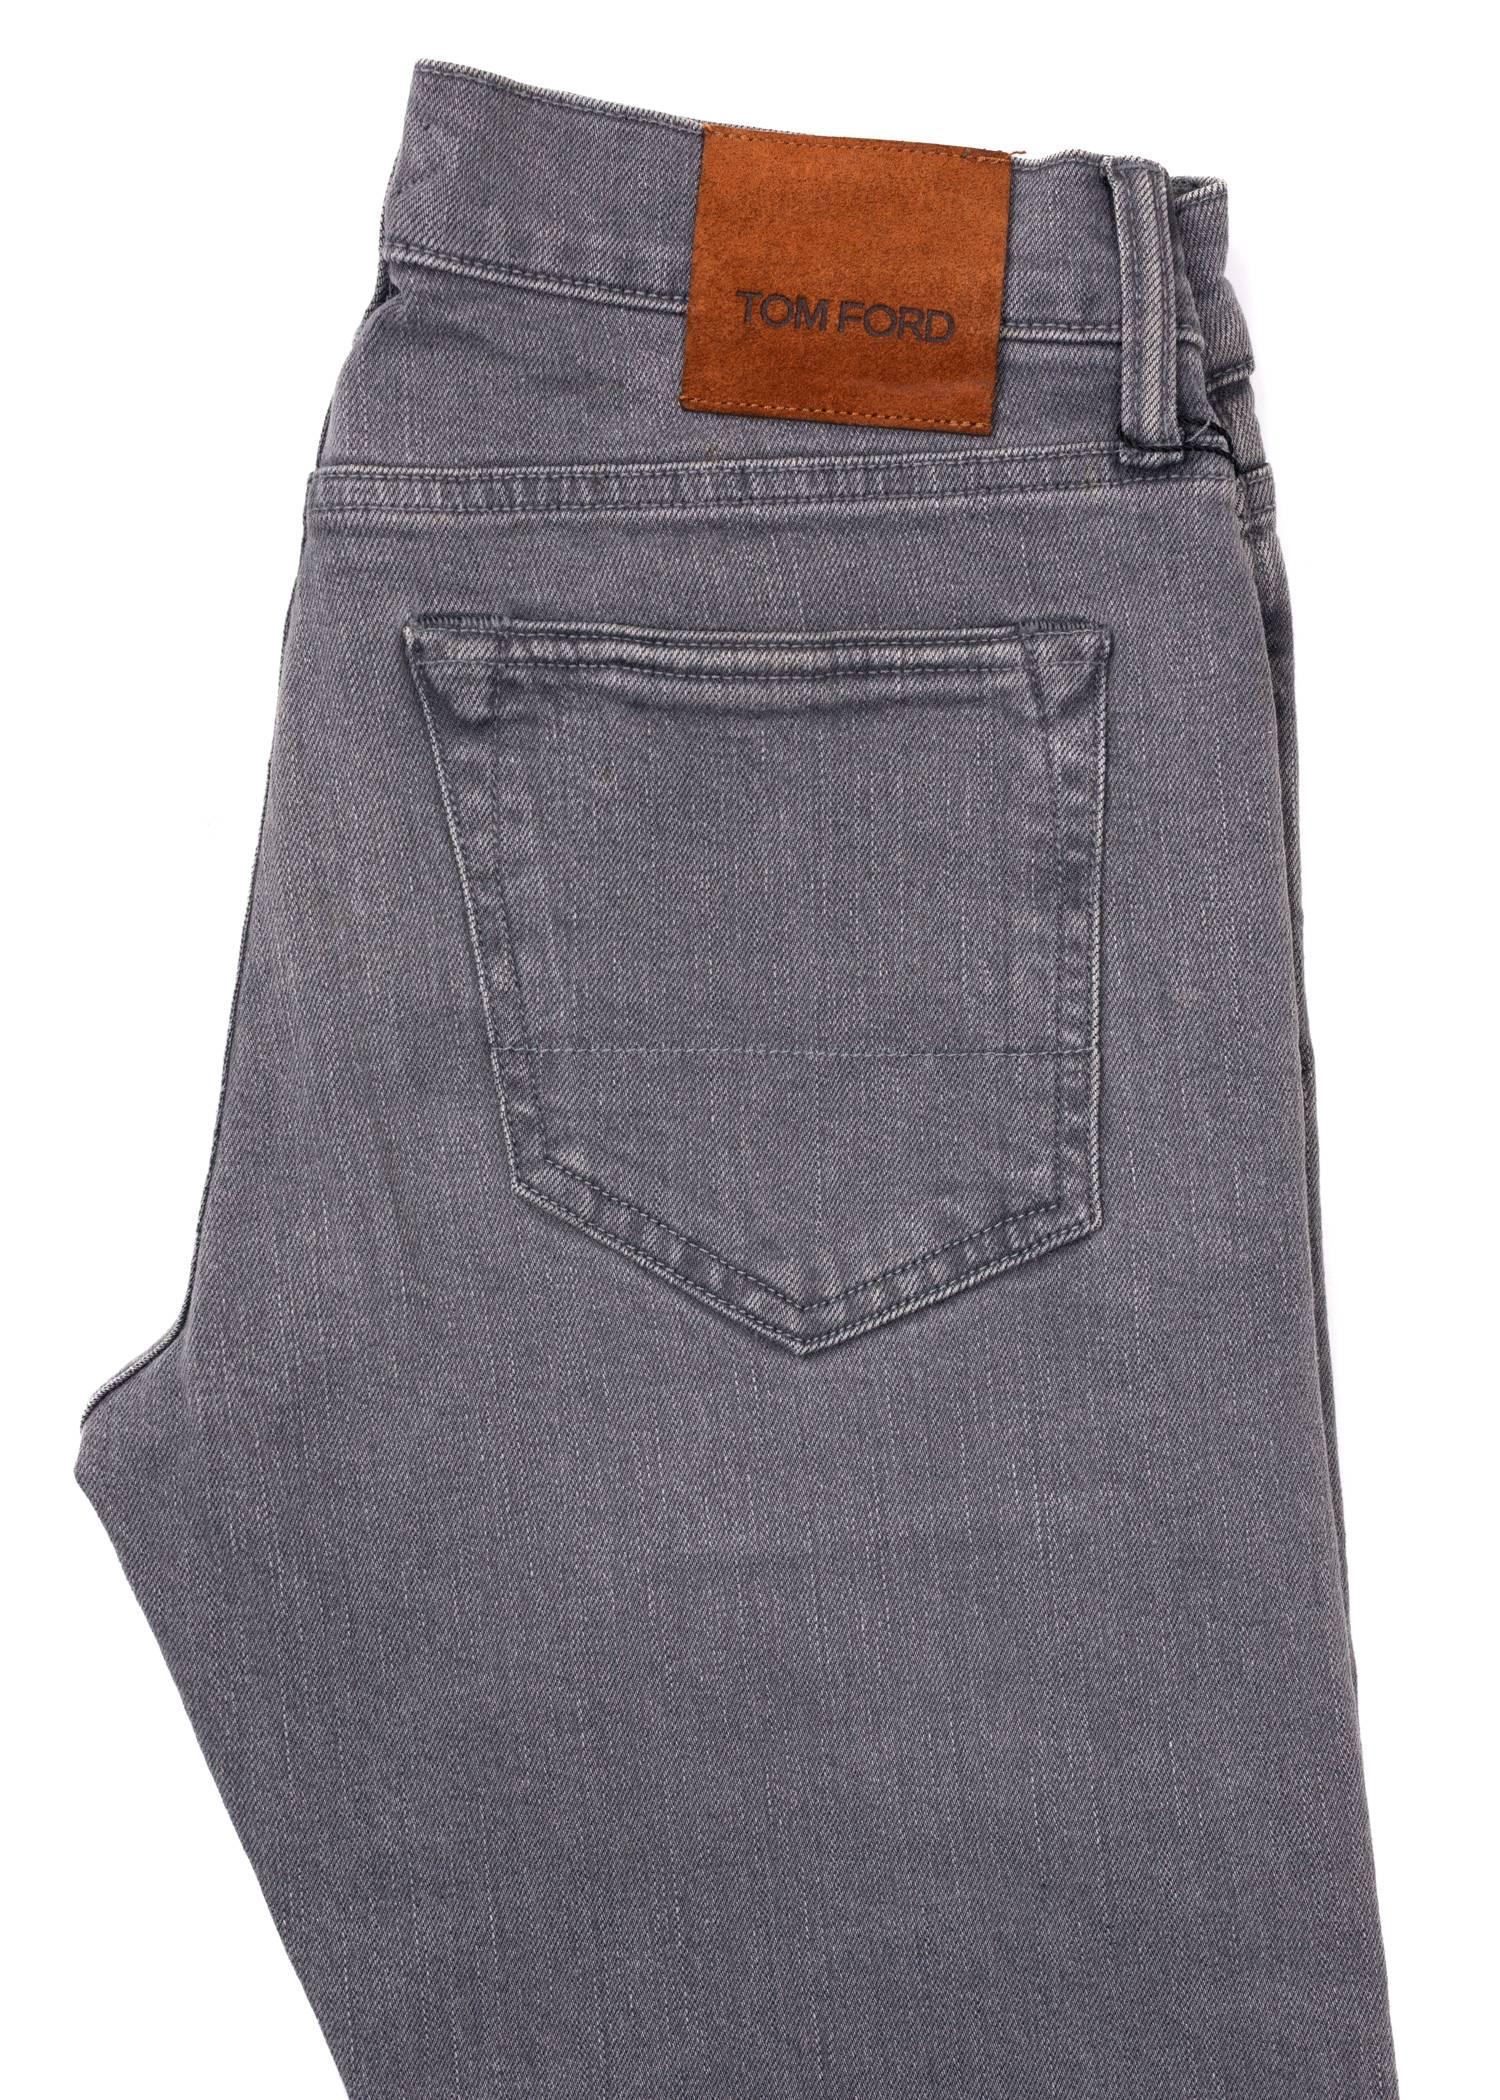 Tom Ford Selvedge Denim Jeans Medium Grey Wash Size 38 Slim Fit Model   In New Condition For Sale In Brooklyn, NY